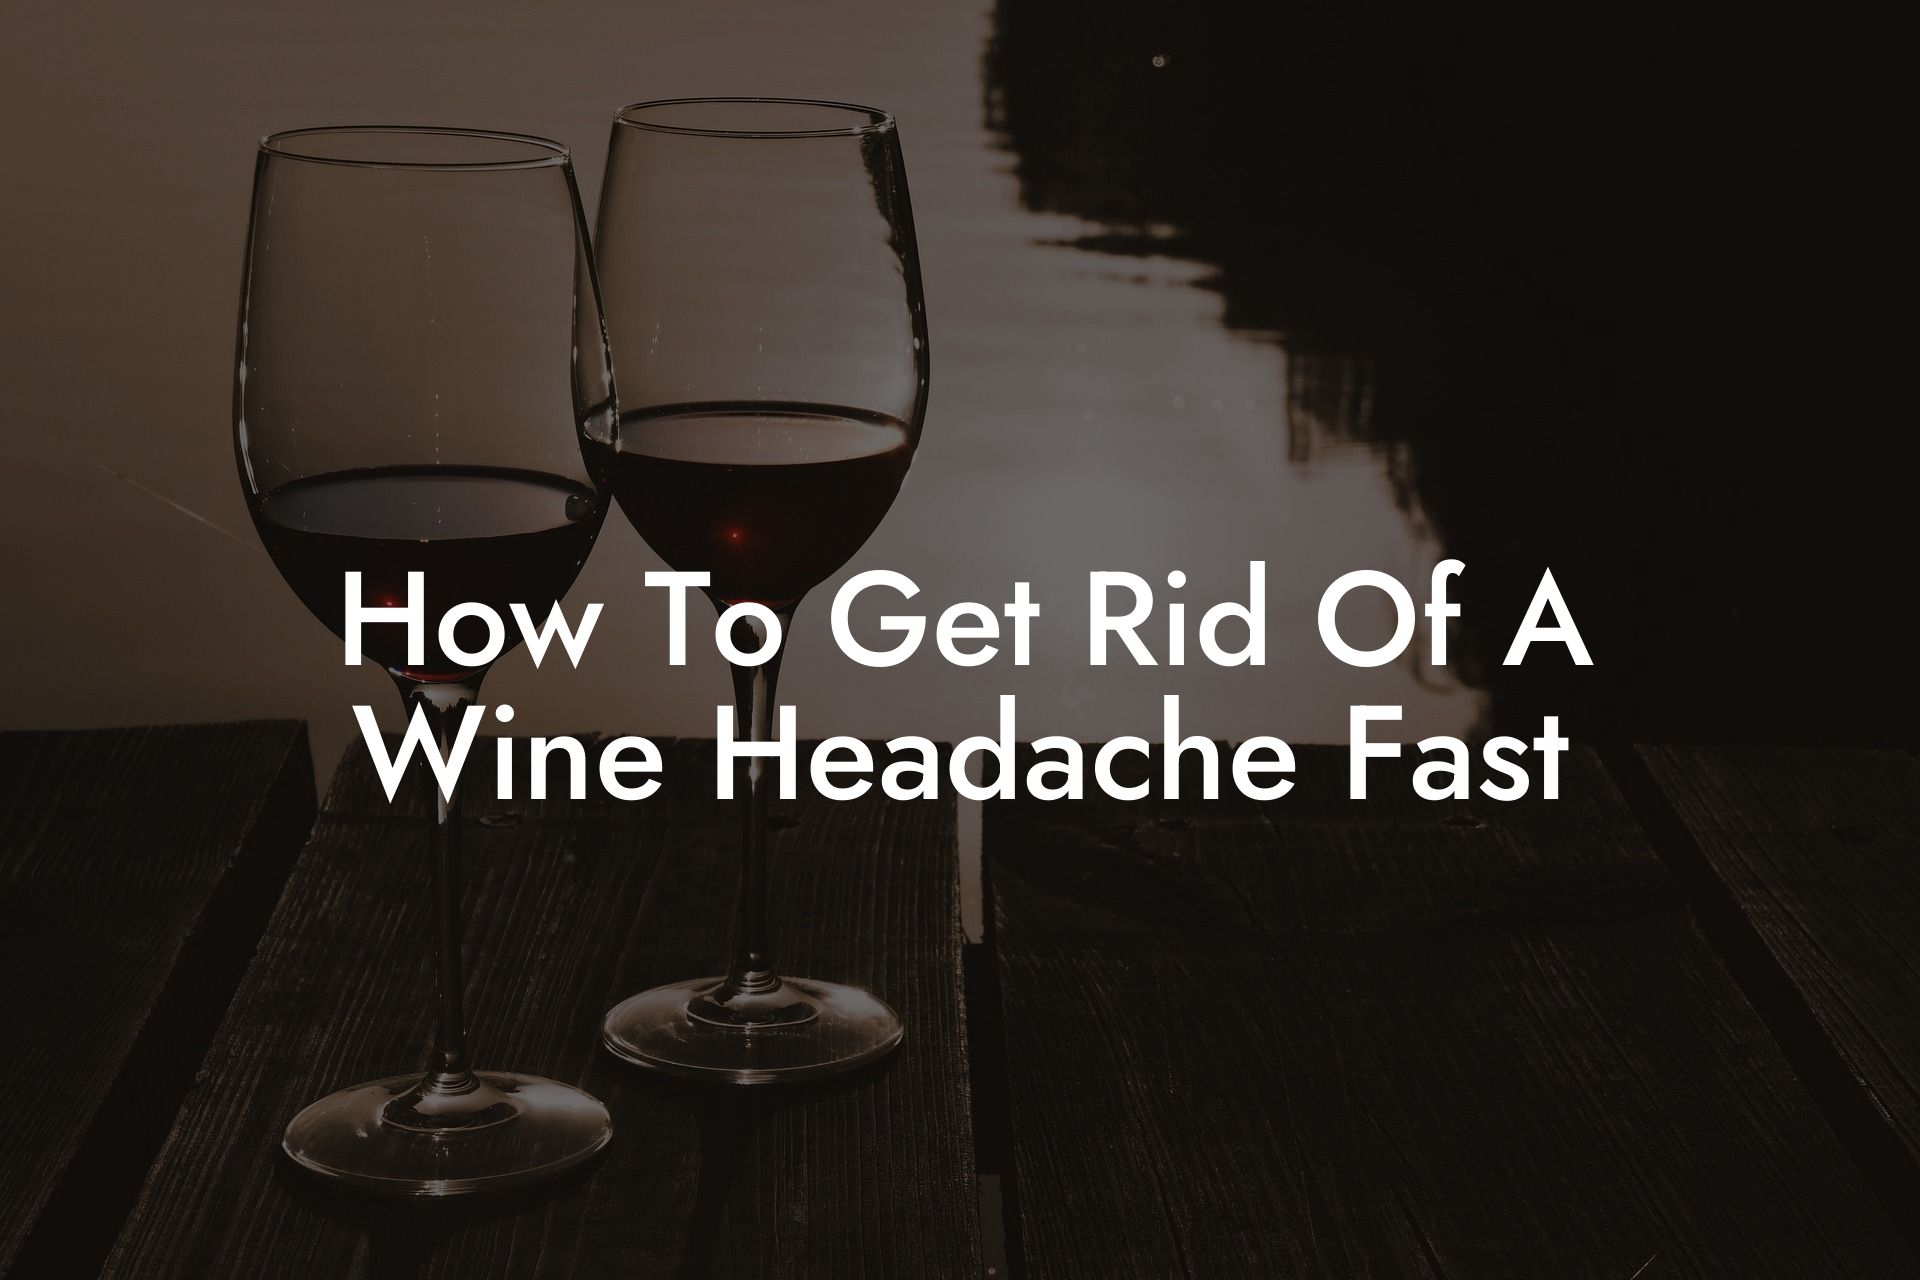 How To Get Rid Of A Wine Headache Fast